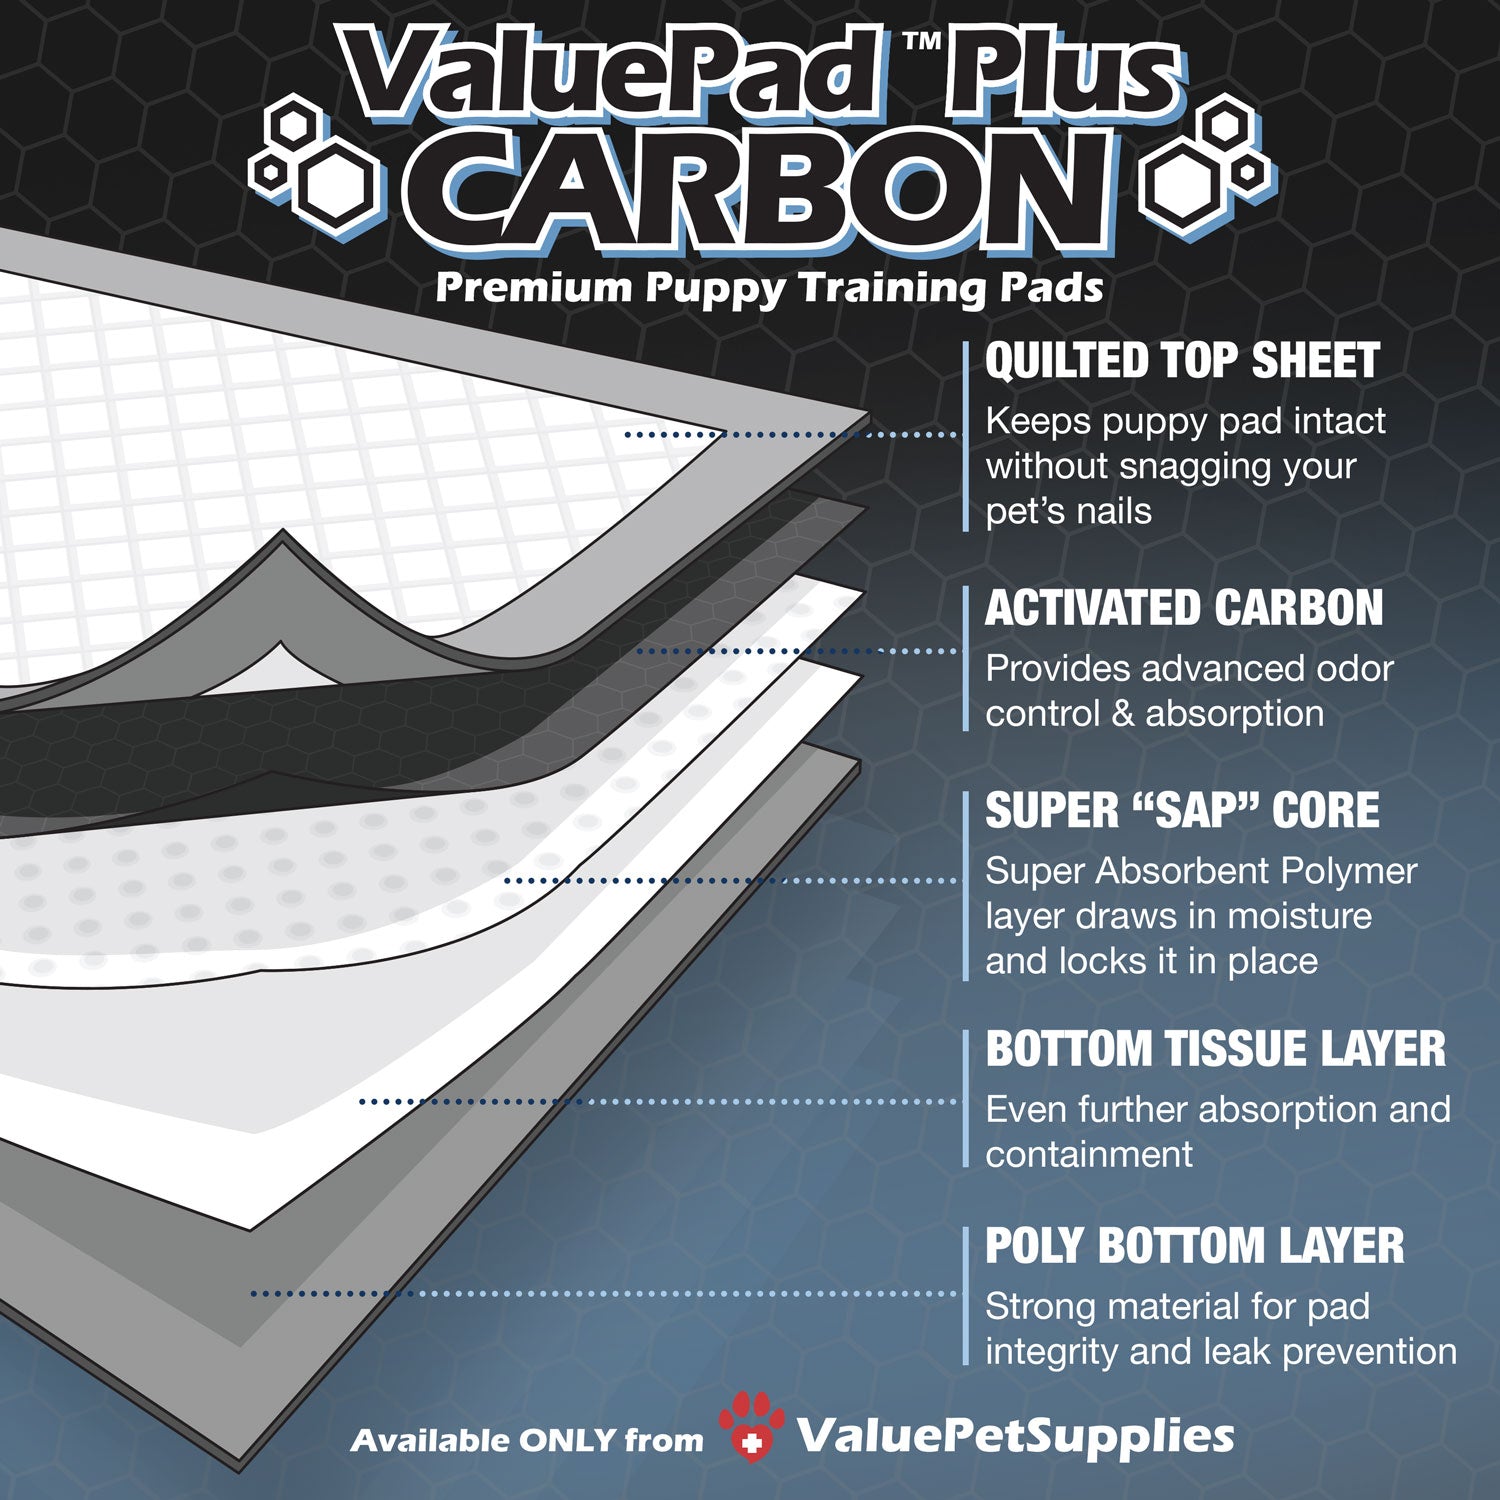 ValuePad Plus Carbon Puppy Pads, Small 17x24 Inch, 100 Count